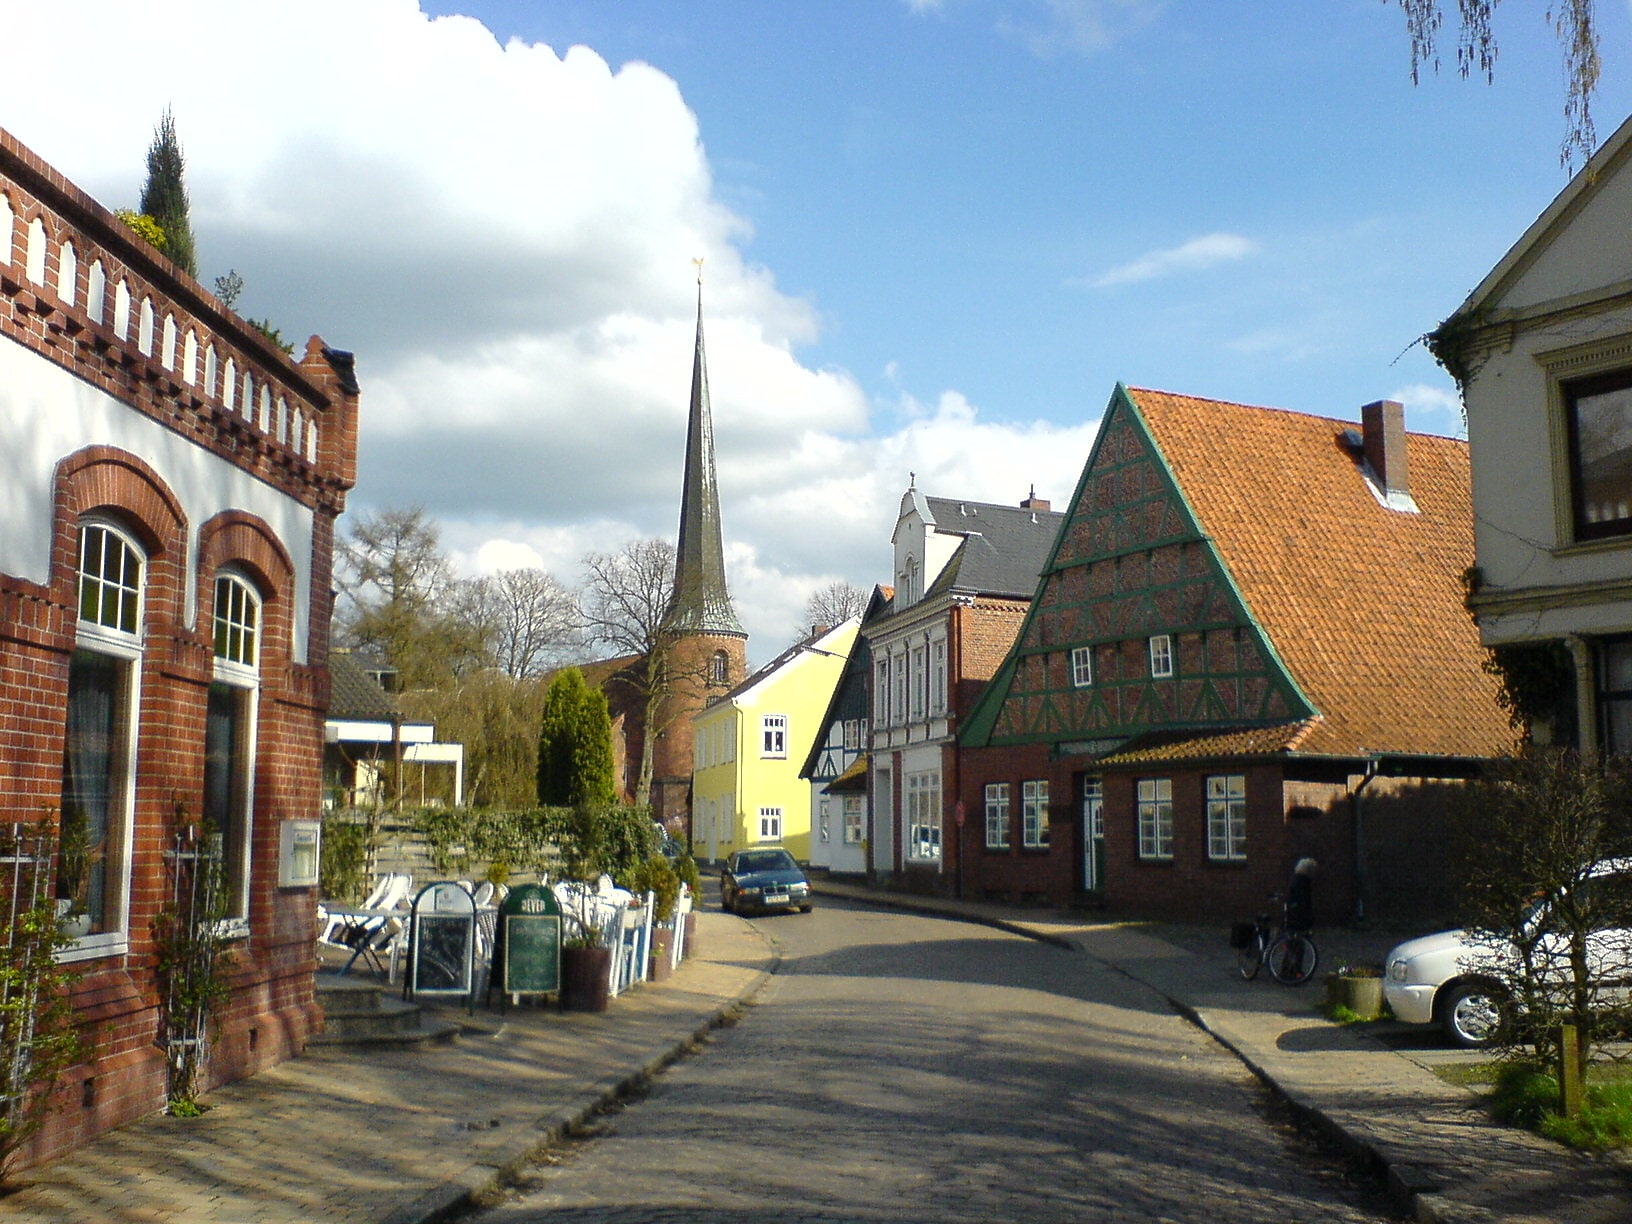 Barmstedt, Germany